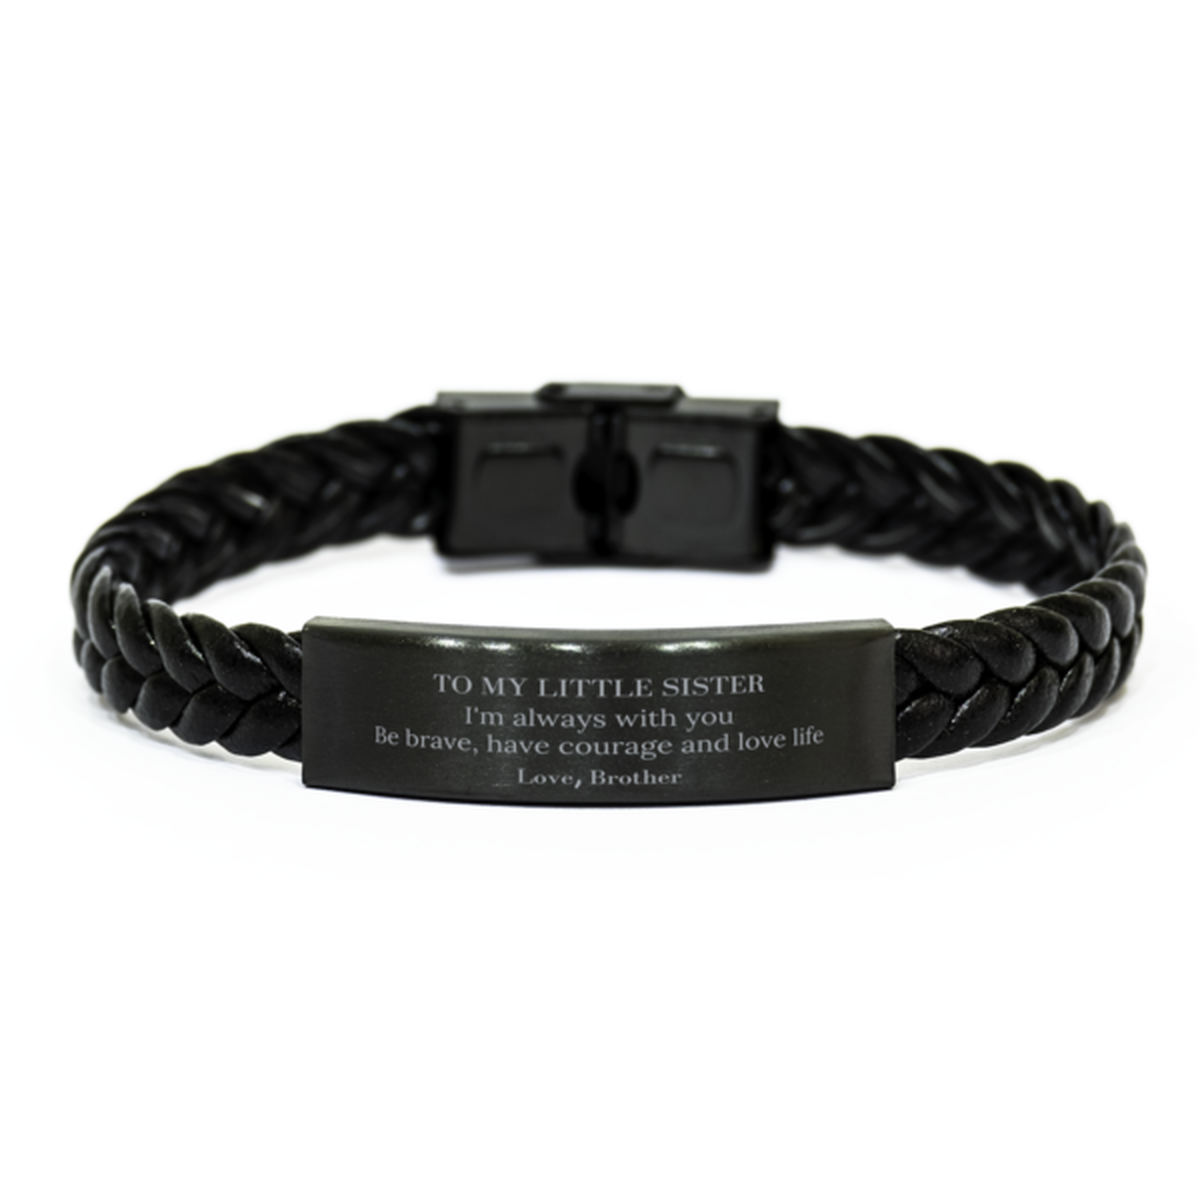 To My Little Sister Gifts from Brother, Unique Braided Leather Bracelet Inspirational Christmas Birthday Graduation Gifts for Little Sister I'm always with you. Be brave, have courage and love life. Love, Brother